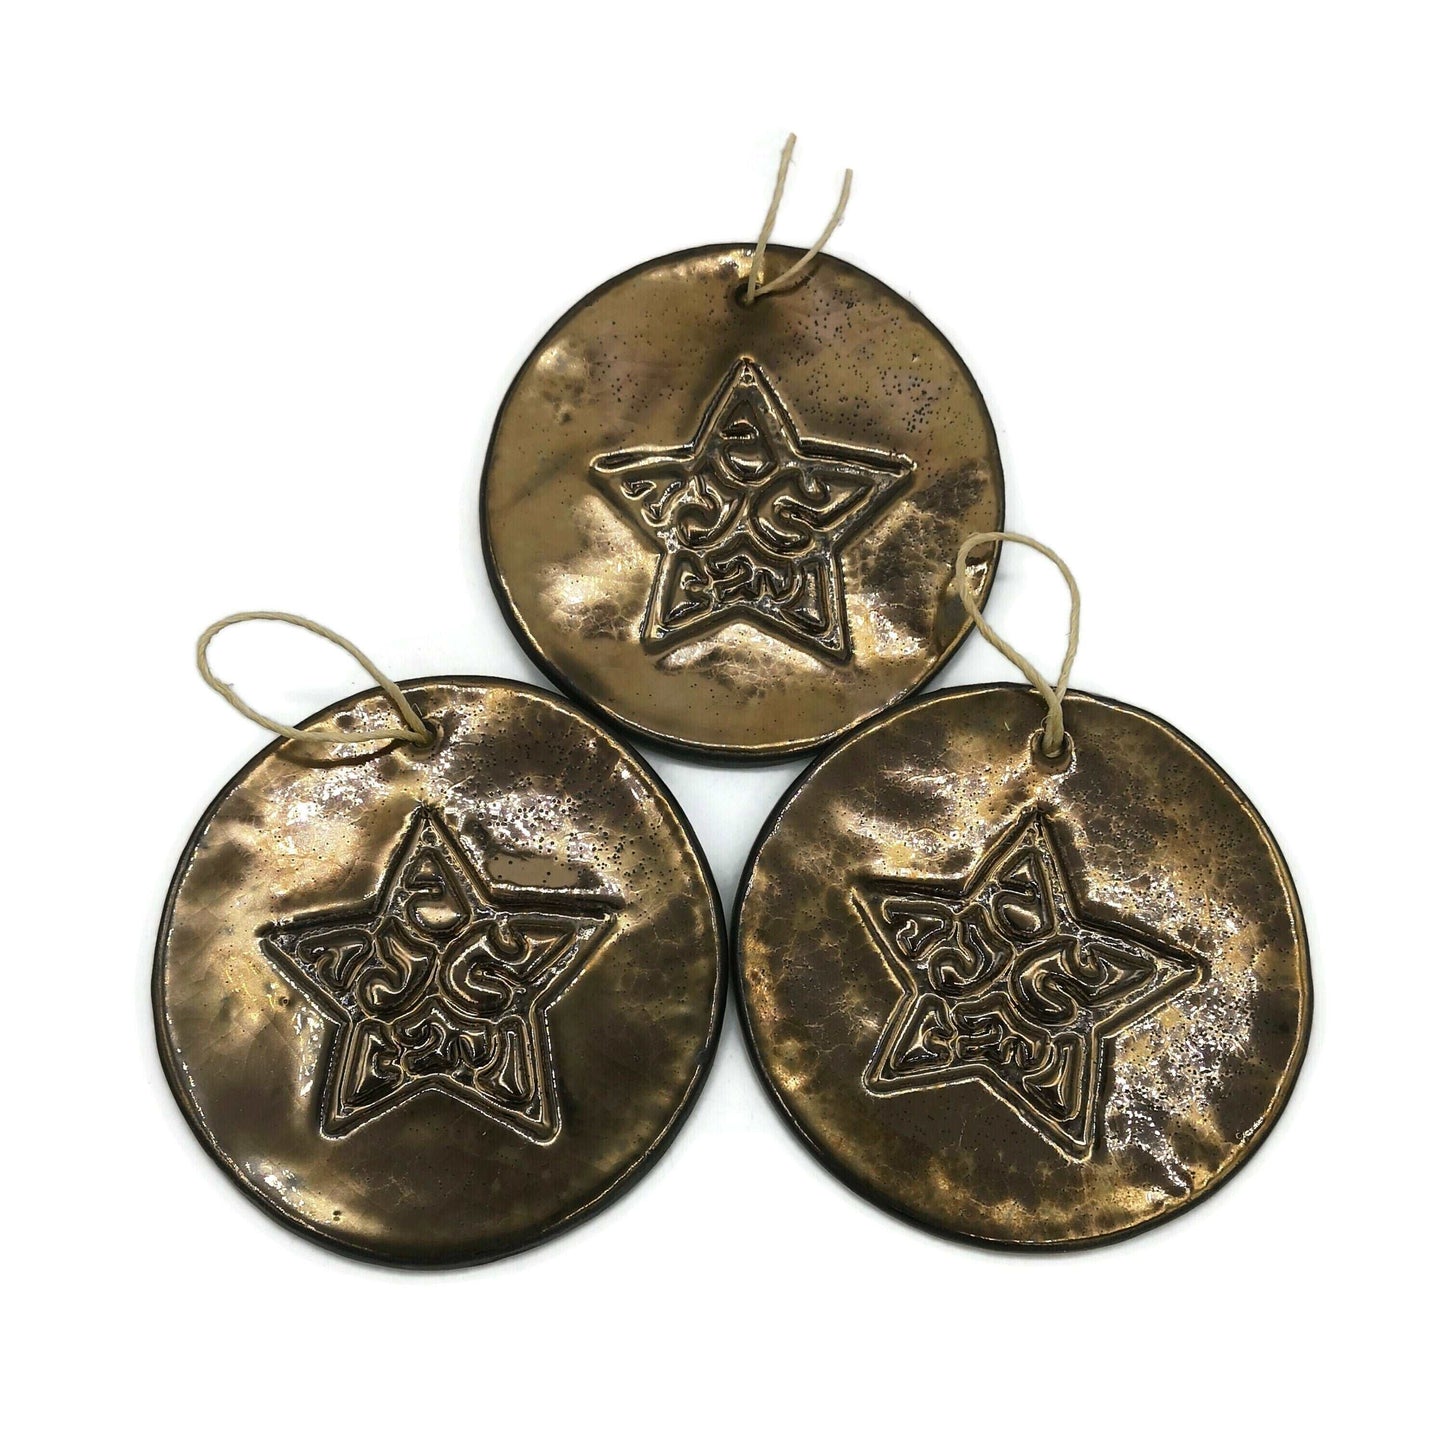 1Pc Large Handmade Ceramic Star Wall Hanging, Golden Christmas Tree Ornament, Holliday Home Decor, Secret Sister Gifts